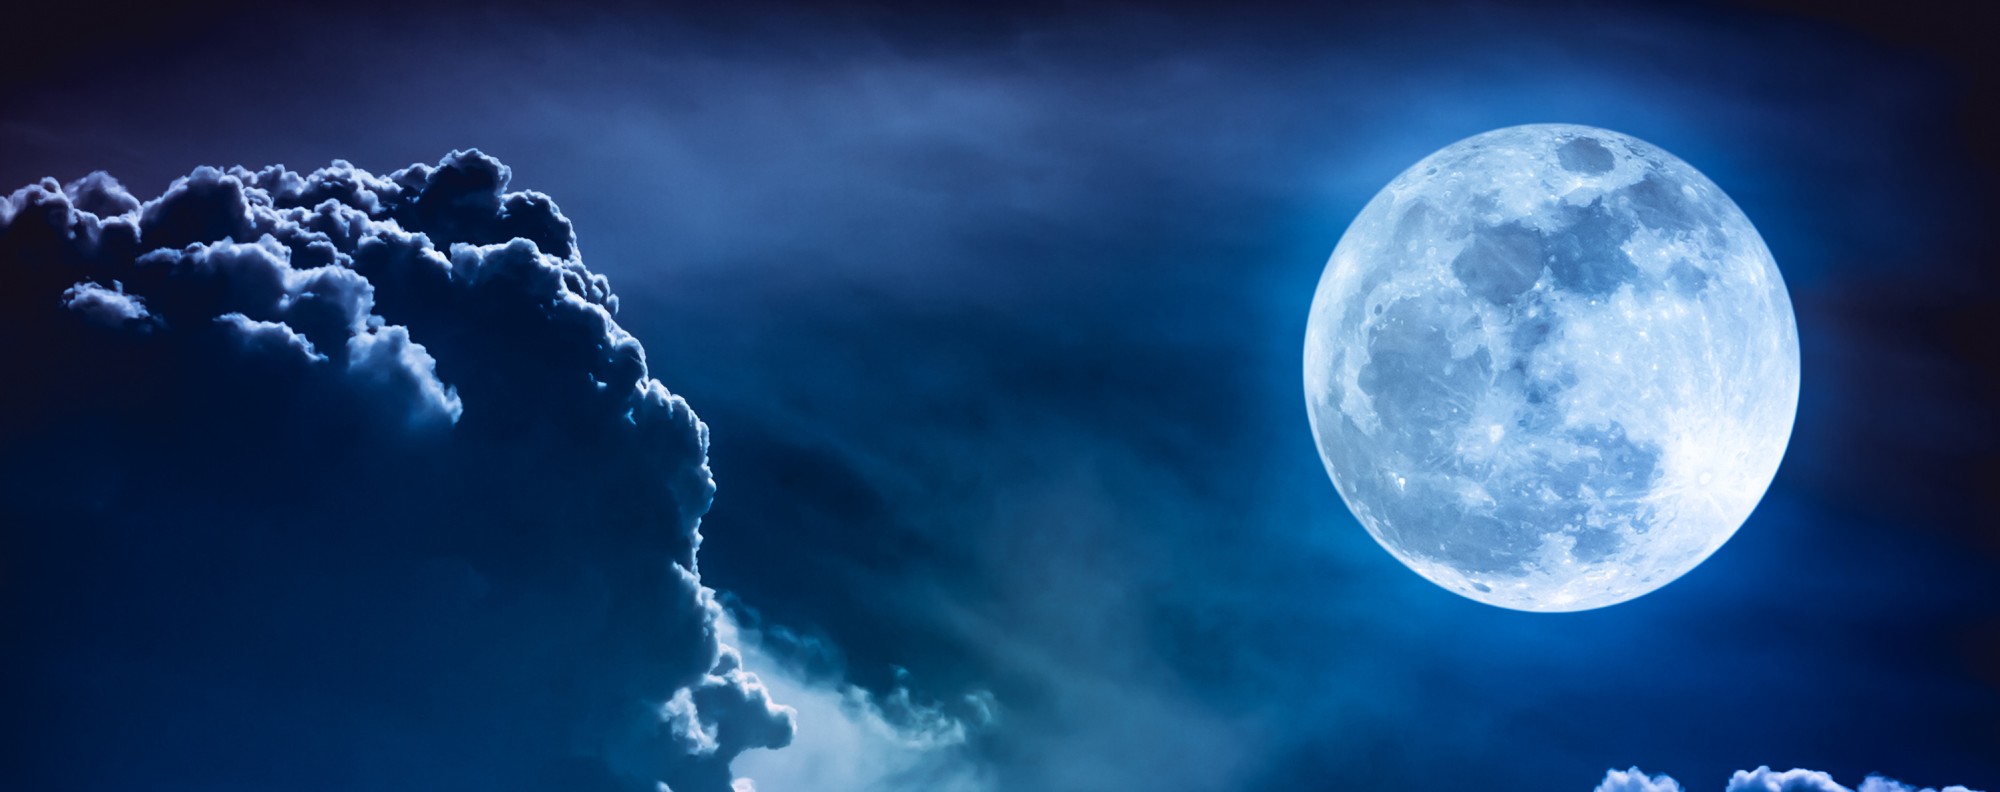 China's Chang'e 6 mission will collect rocks from Earth's moon. Photo: Shutterstock